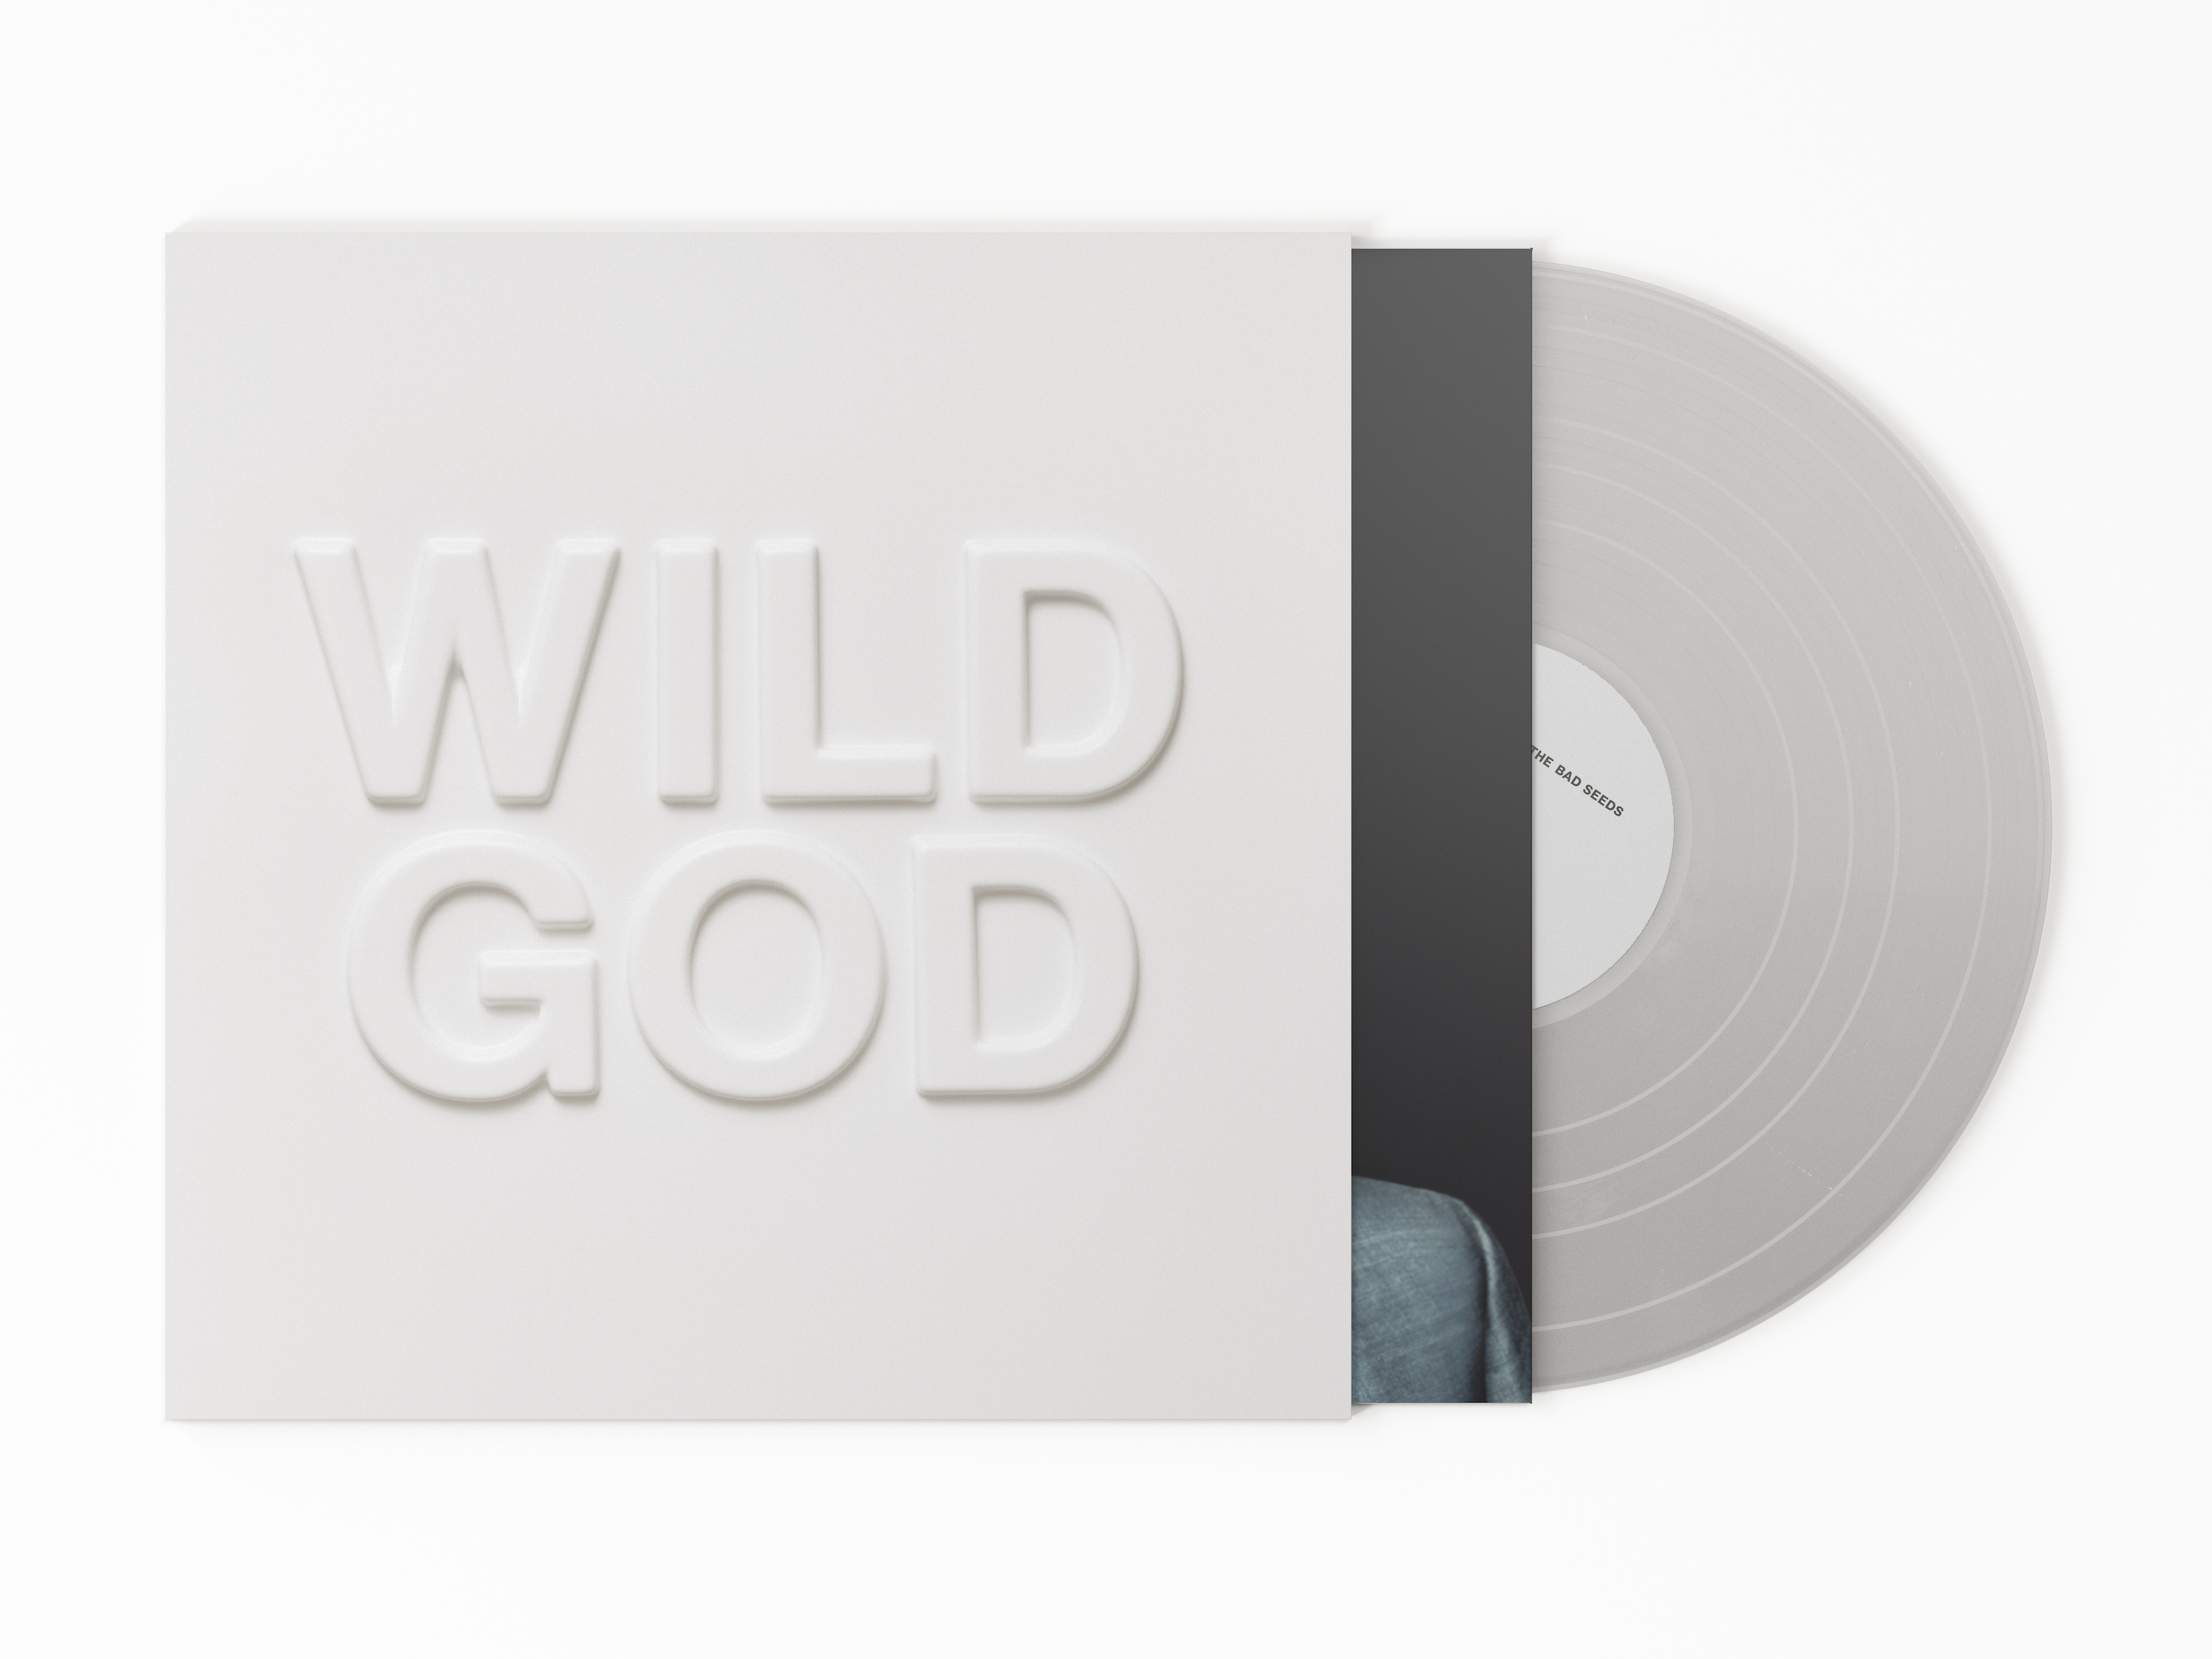 Nick Cave & The Bad Seeds- Wild God (Limited Edition Clear Vinyl) (PREORDER)